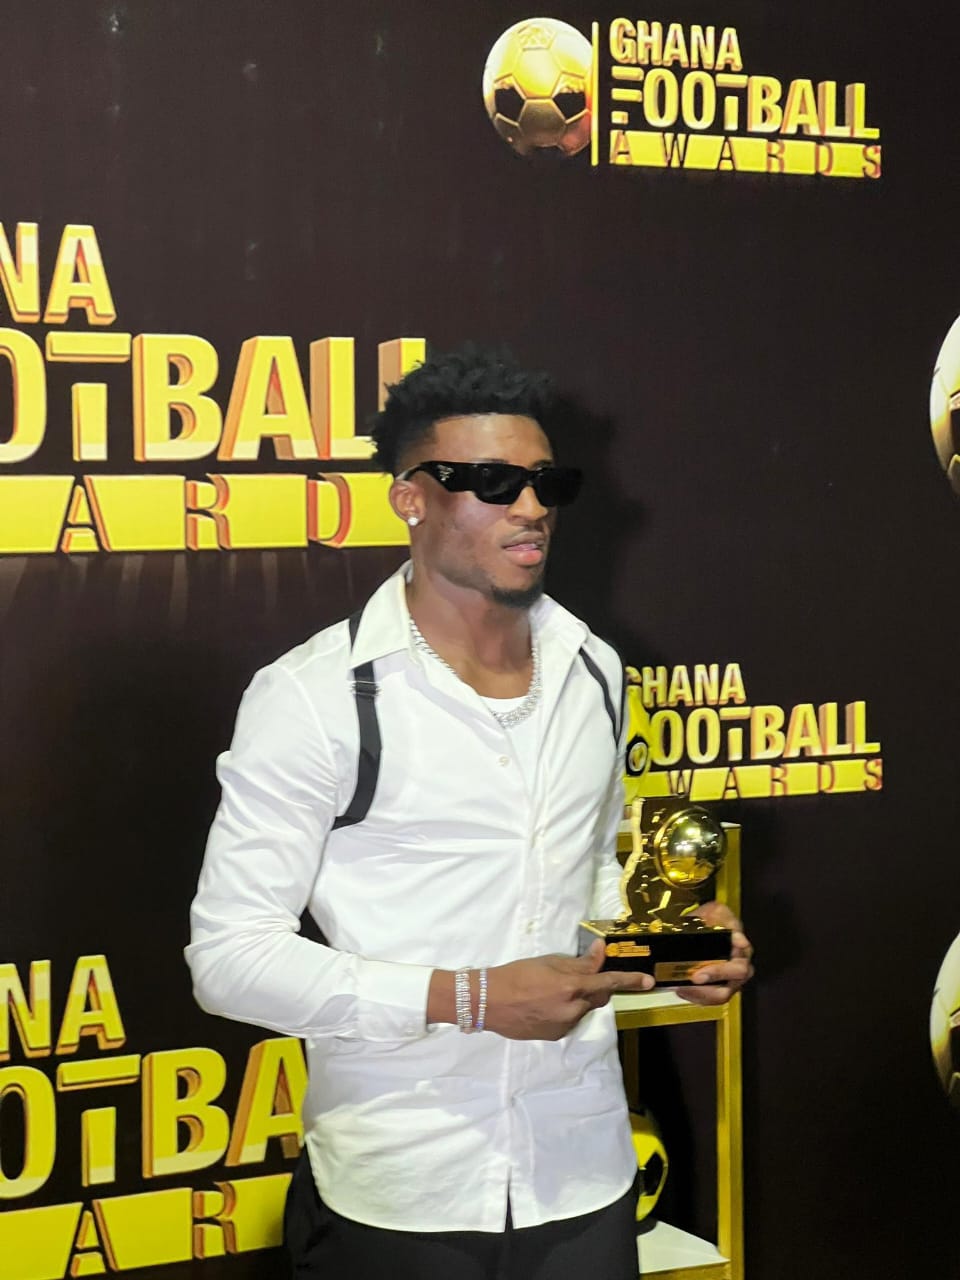 Mohammed Kudus crowned the best Footballer of the Year Award at the Ghana Football Awards